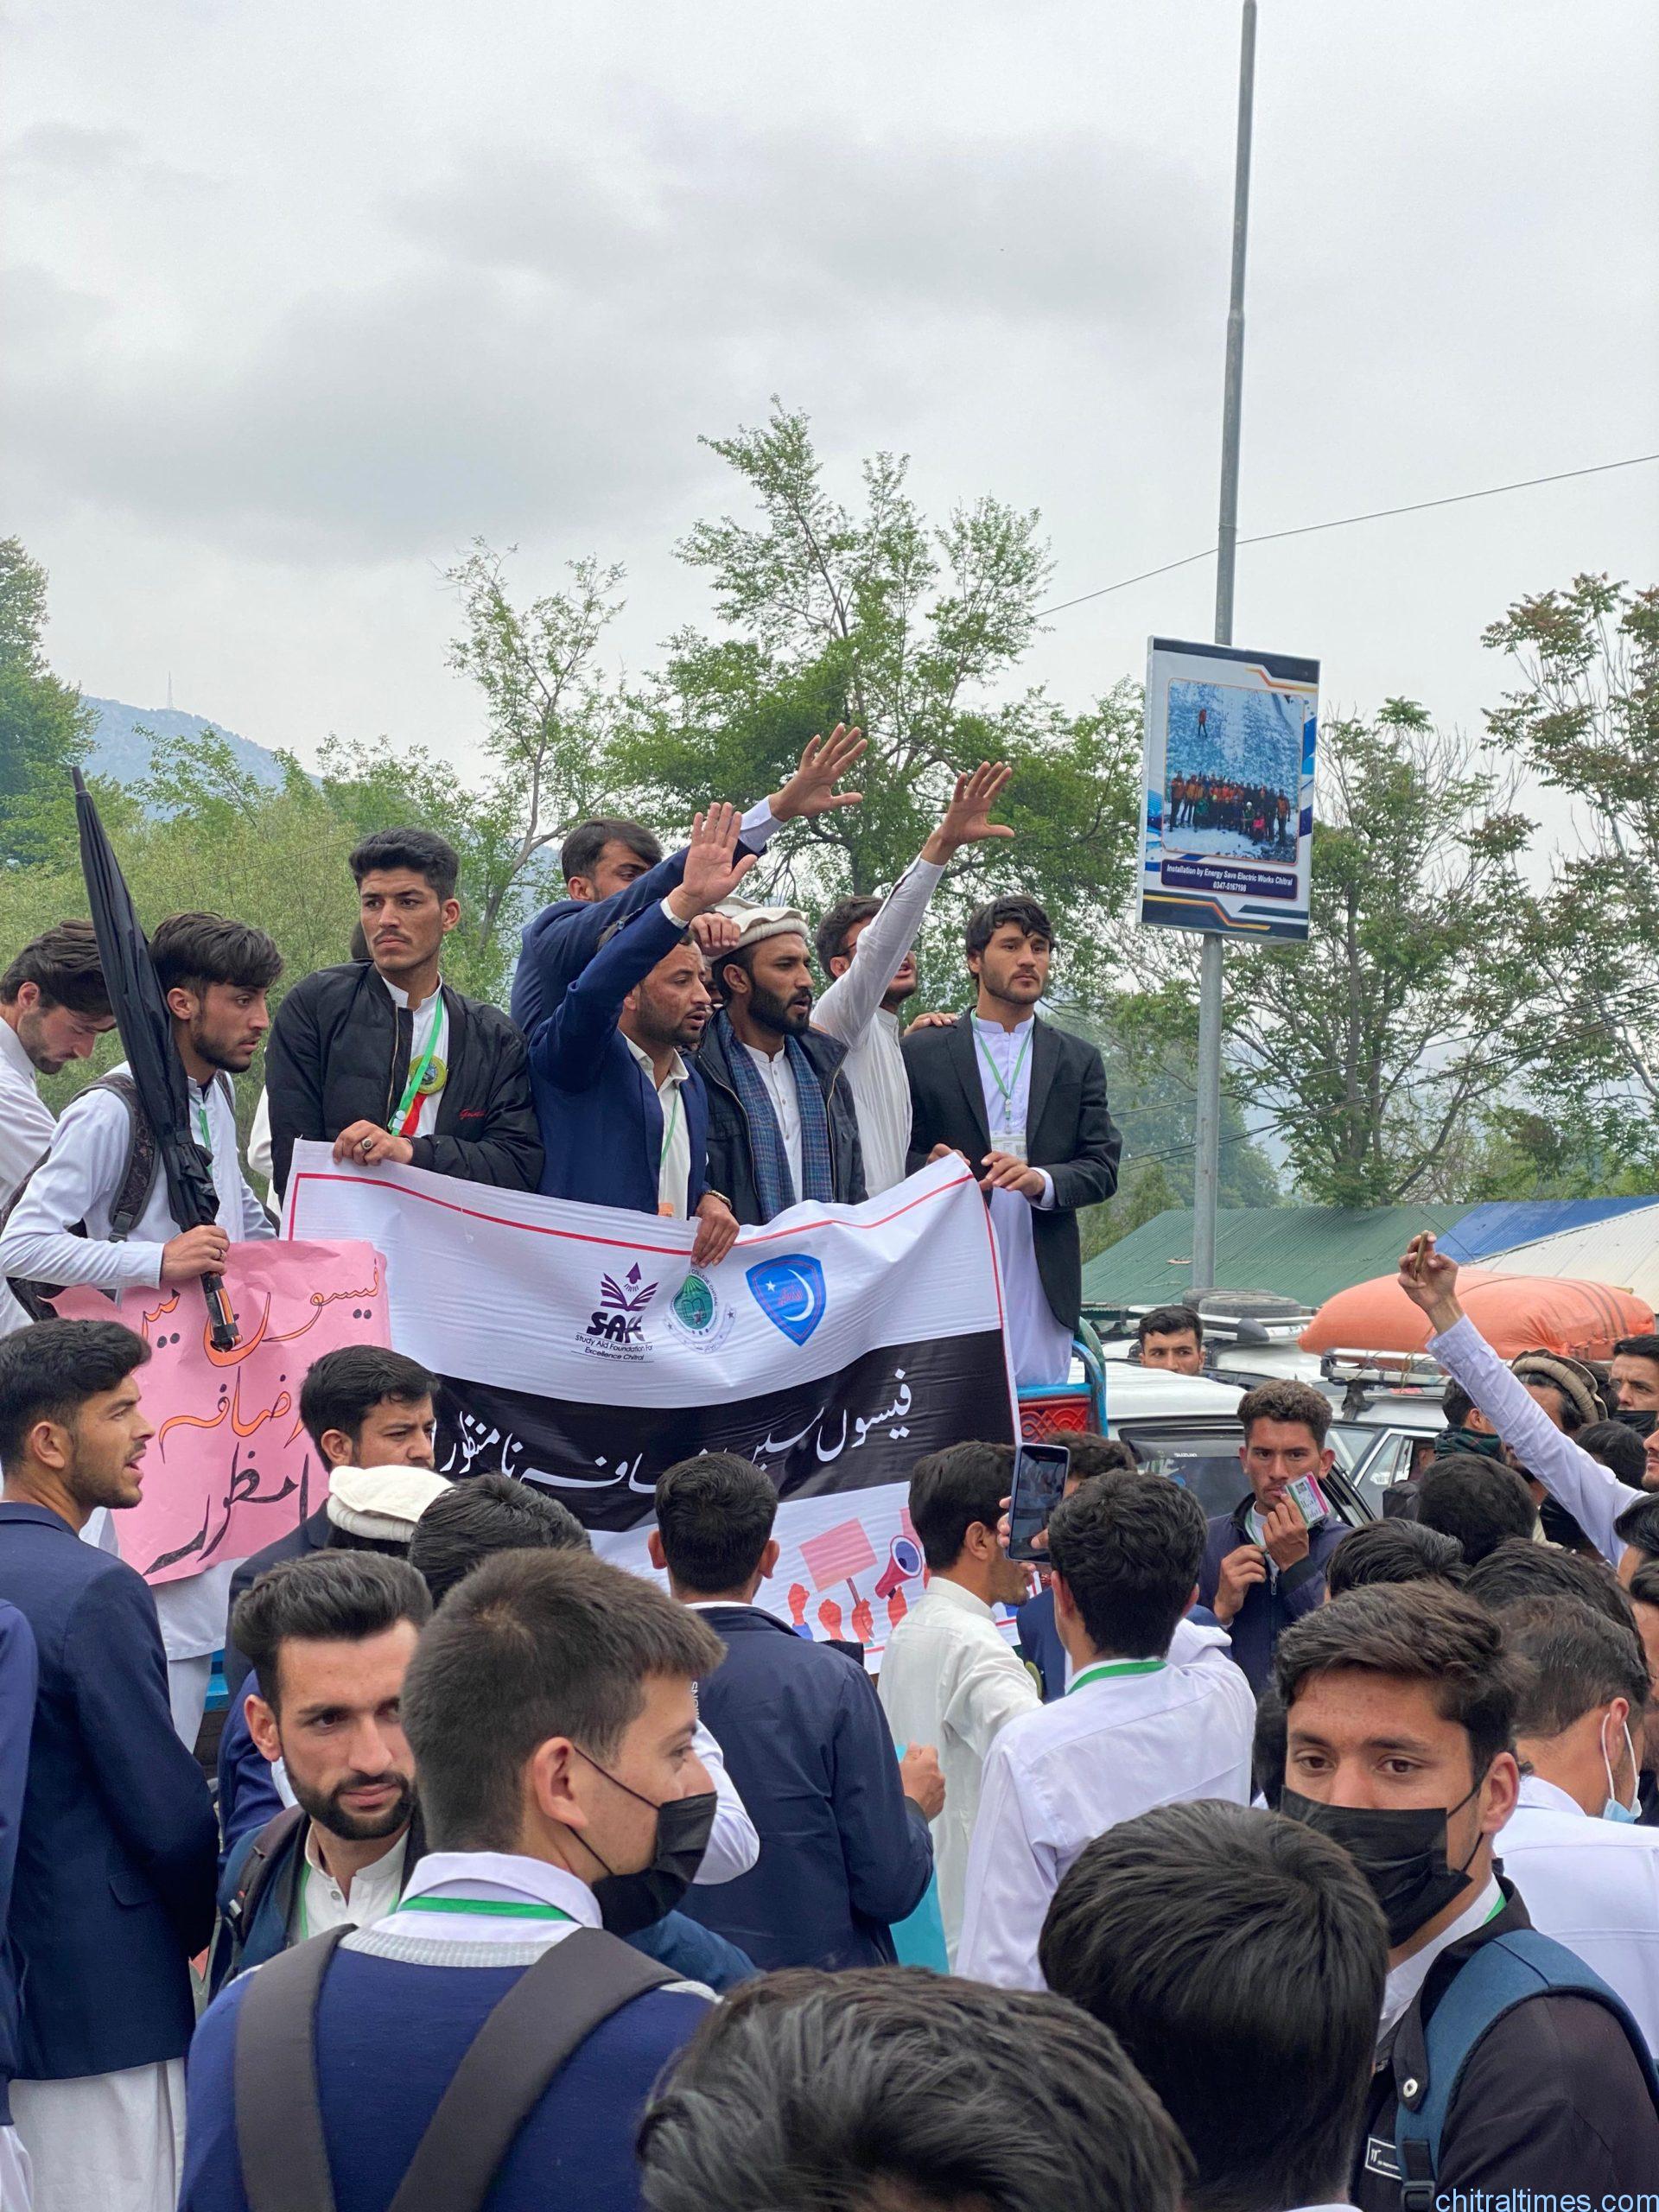 chitraltimes gdc students of chitral protest rally against fee increase 4 scaled